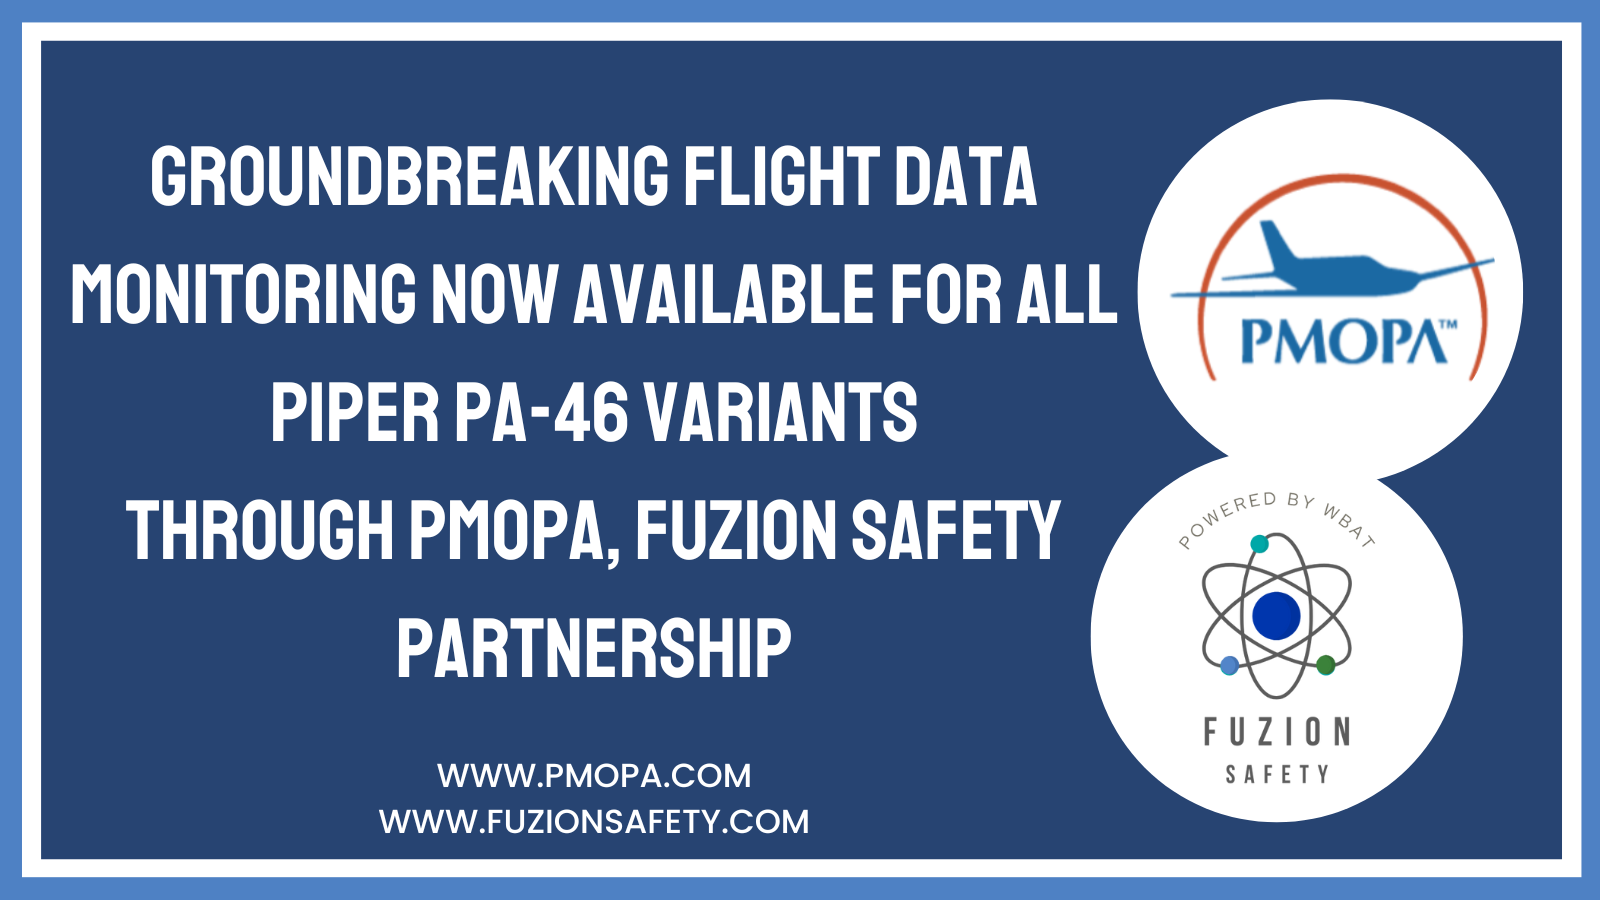 Groundbreaking Flight Data Monitoring Now Available for Piper PA-46 Variants Through PMOPA/Fuzion Safety Partnership